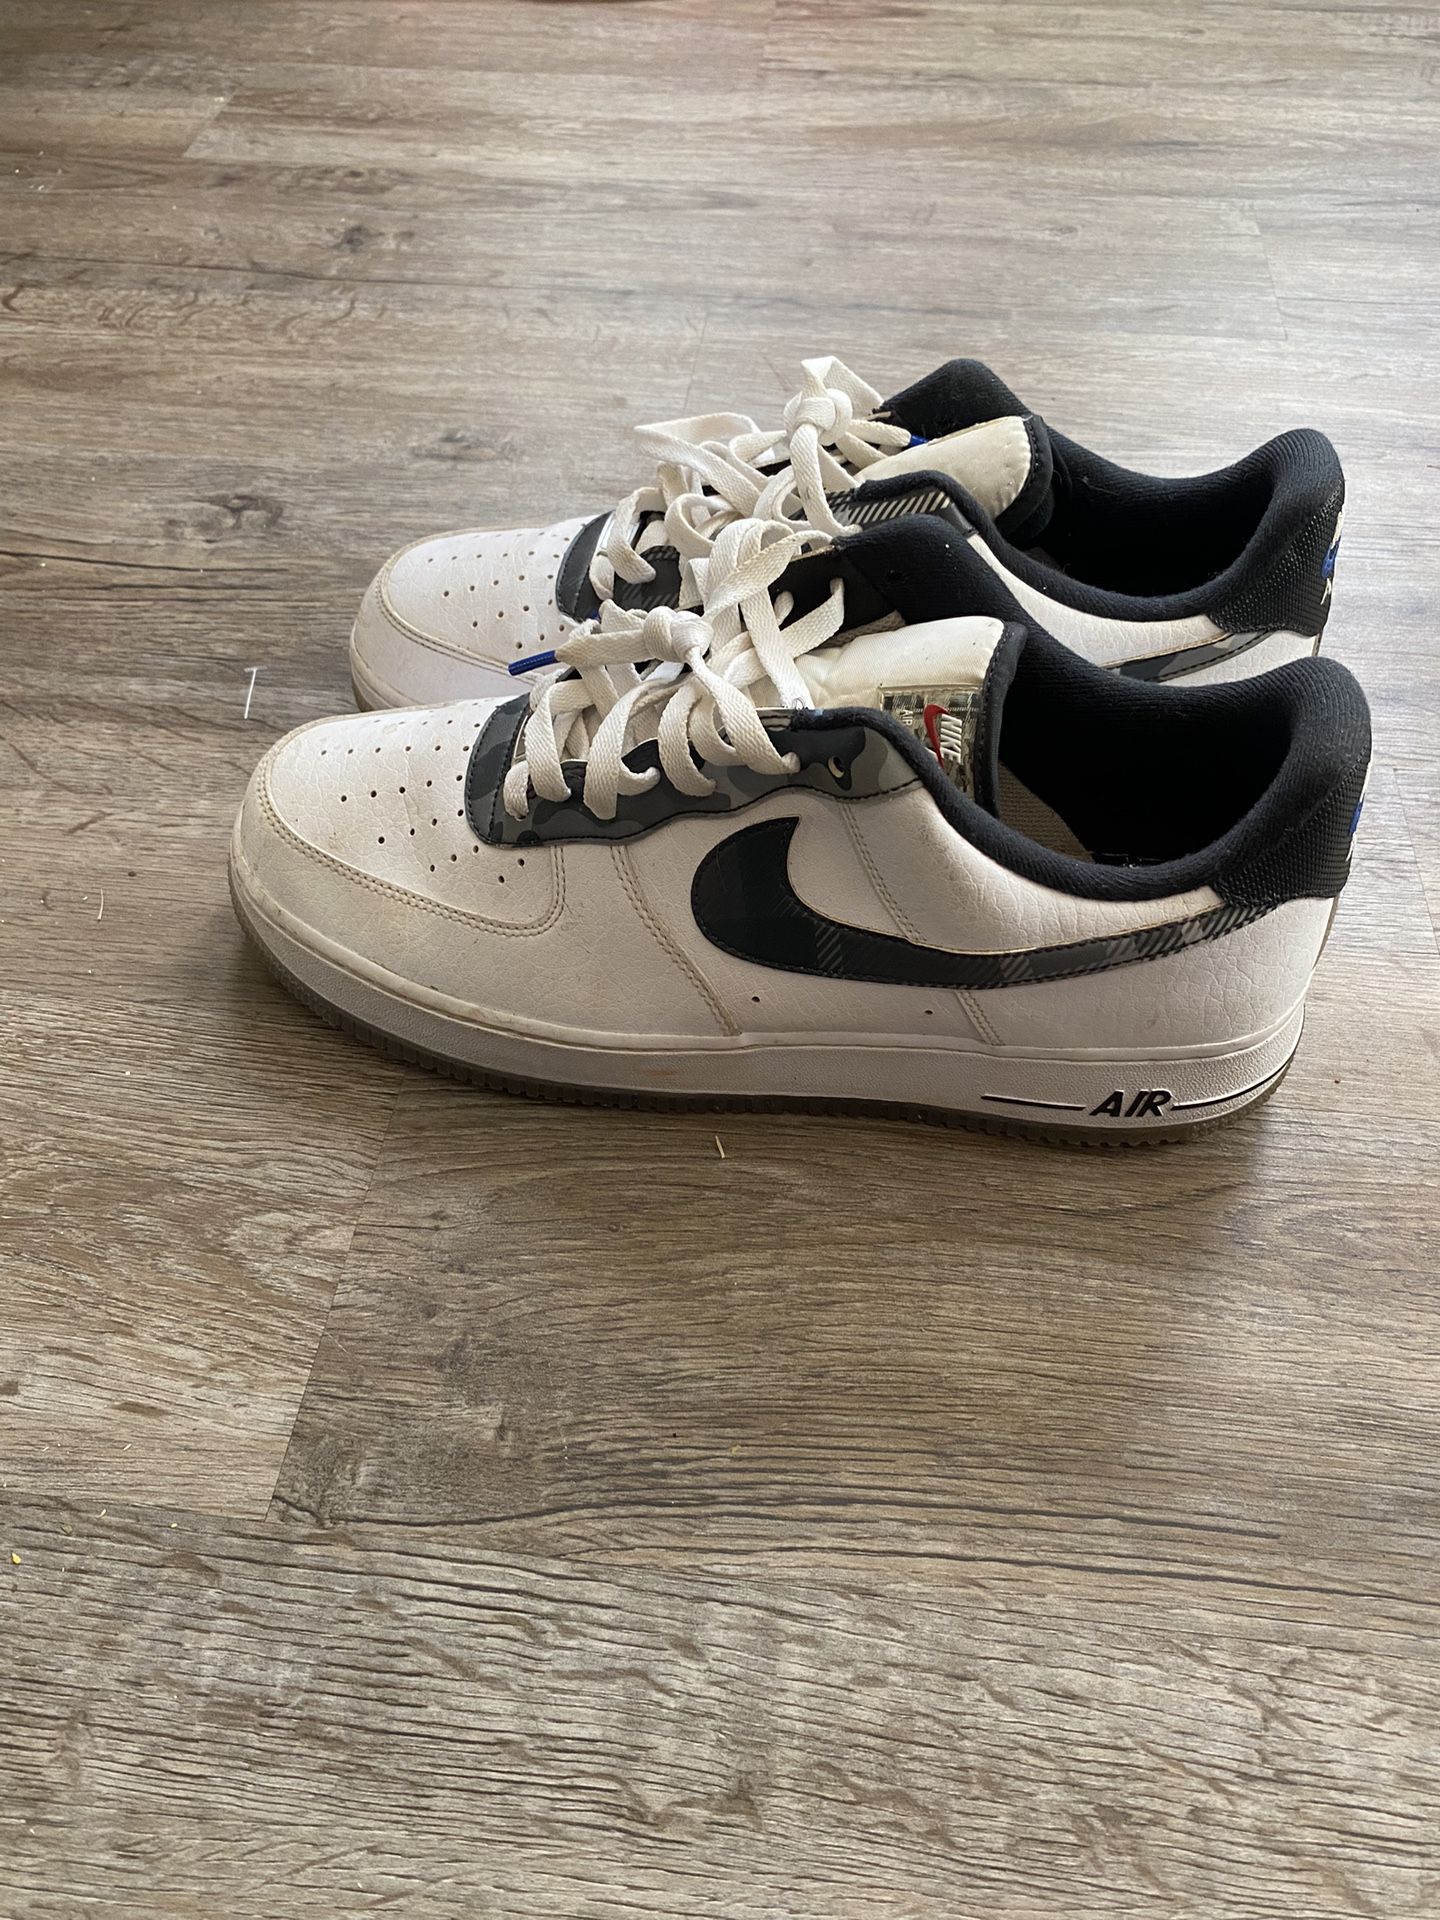 Air Forces 1